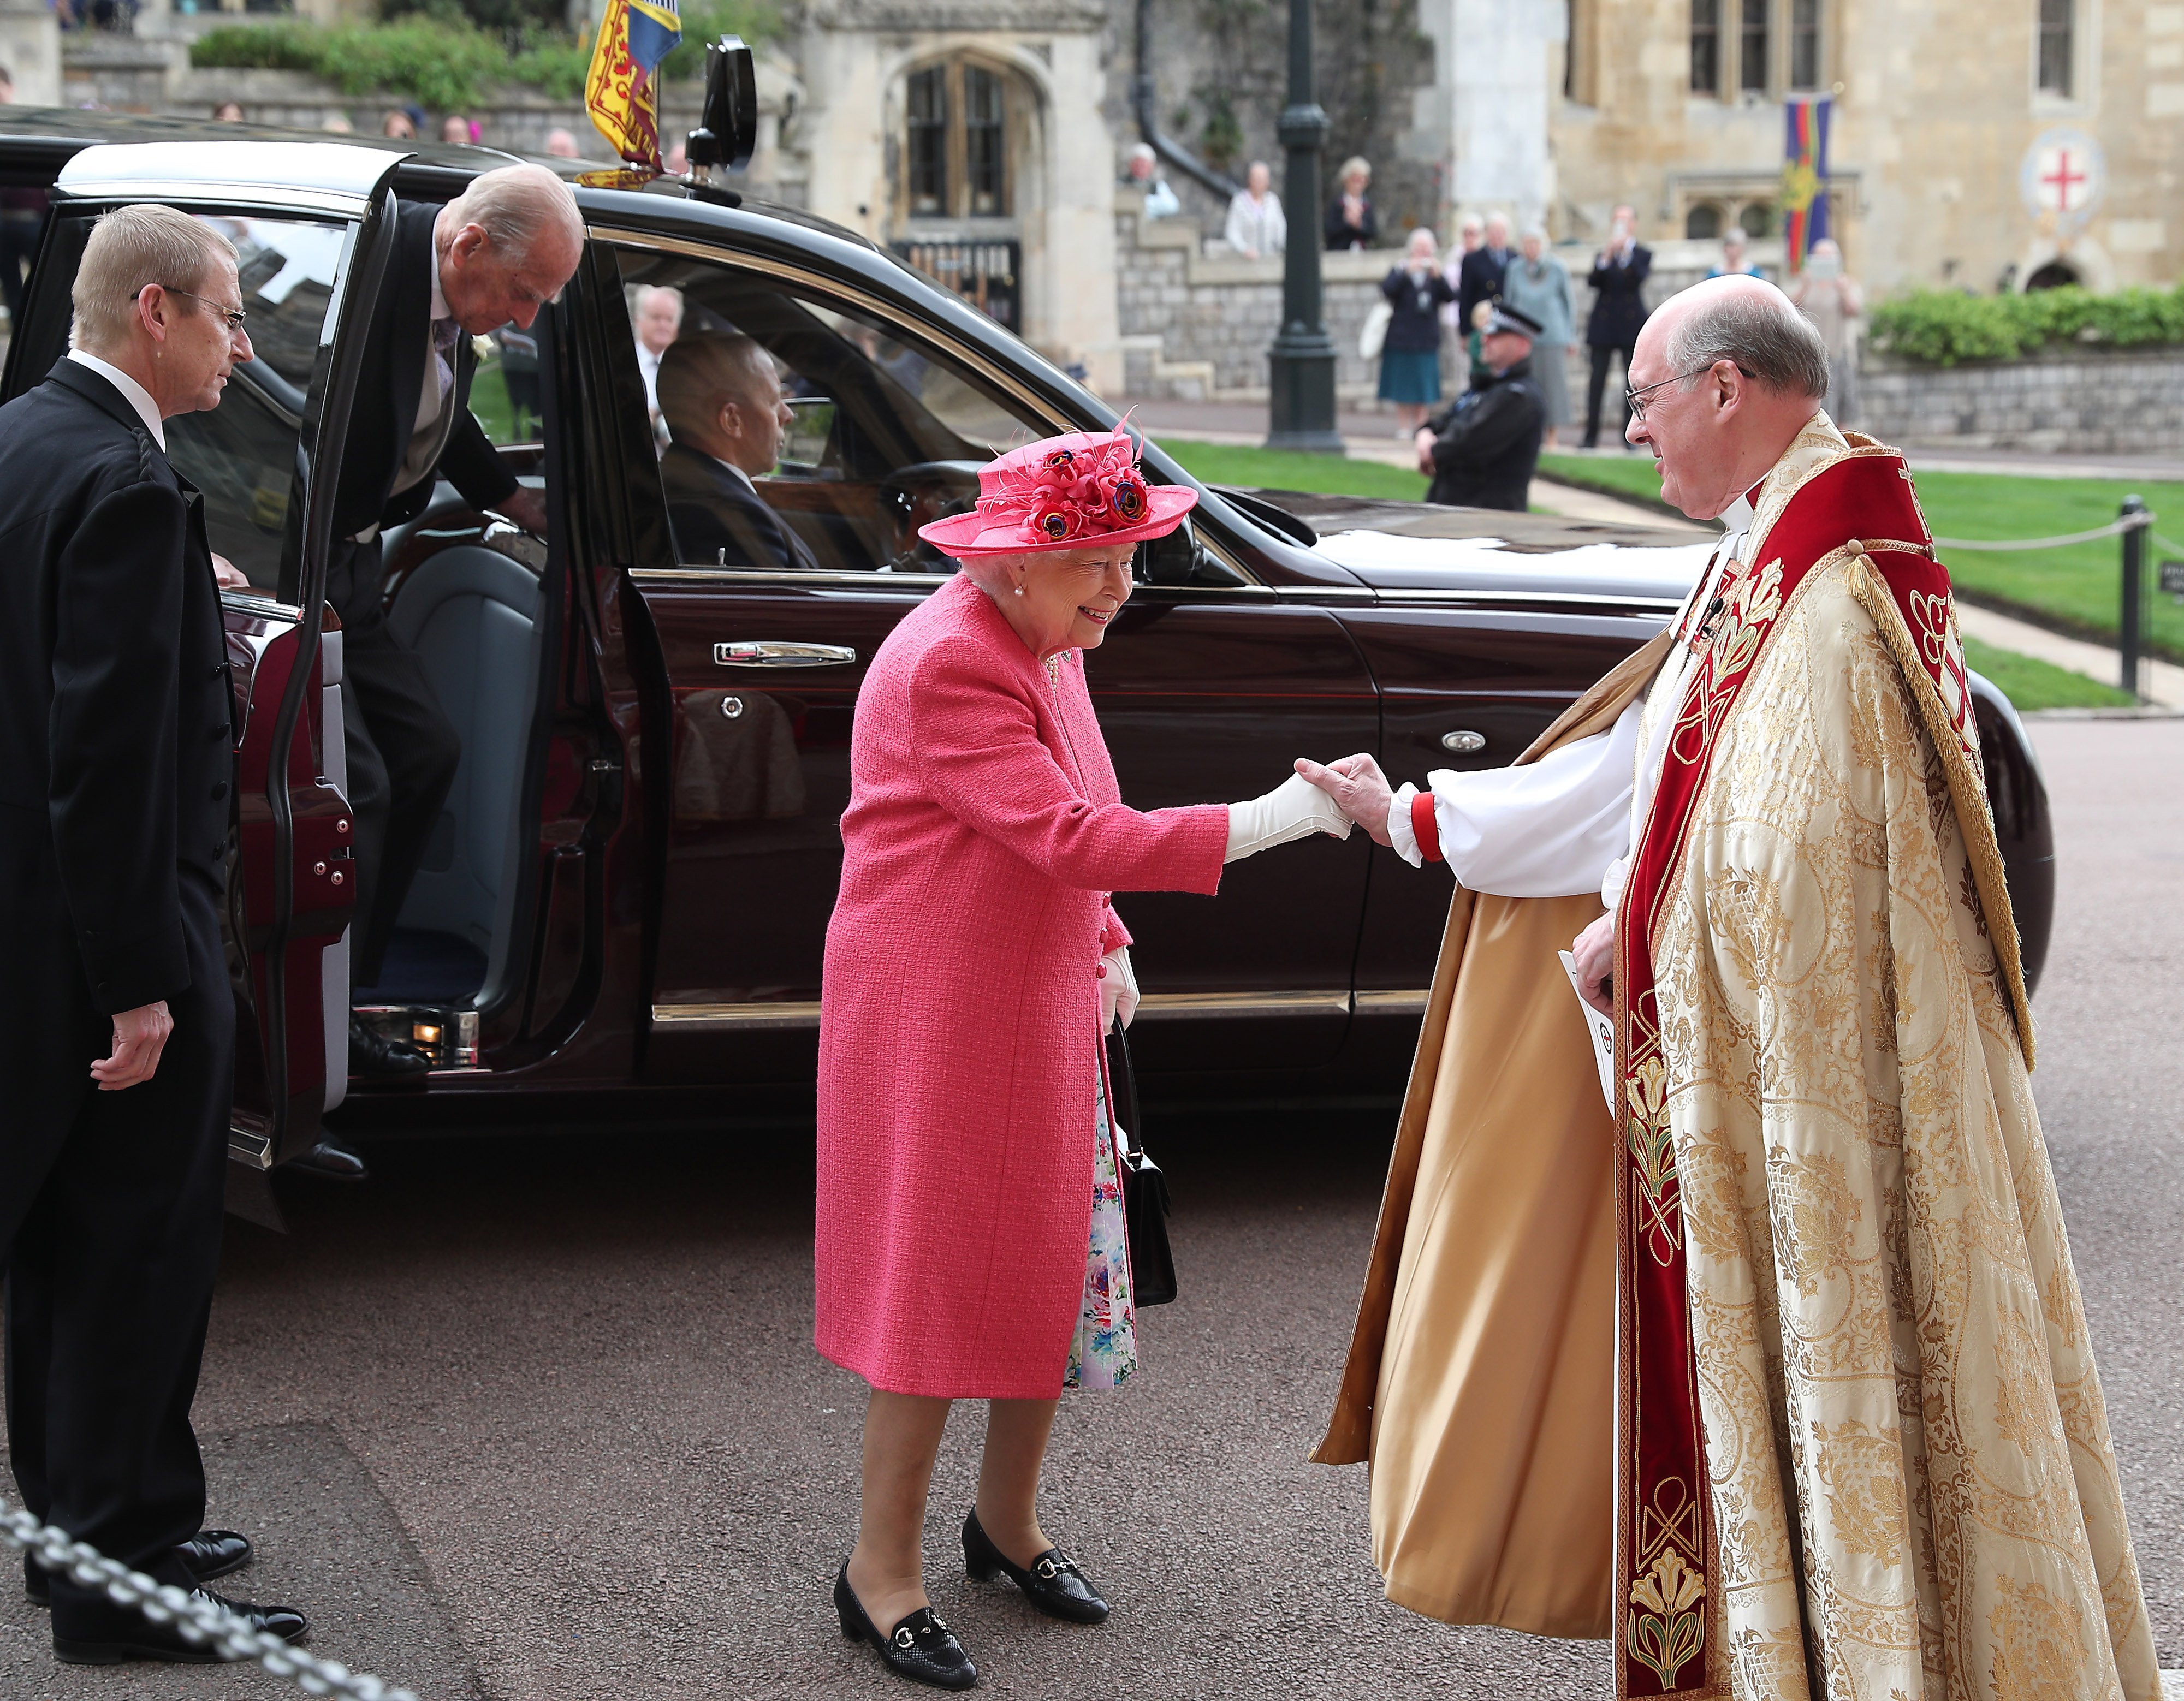 Queen Elizabeth II and Prince Philip arriving at St George's Chapel in Windsor Castle, England | Photo: Getty Images